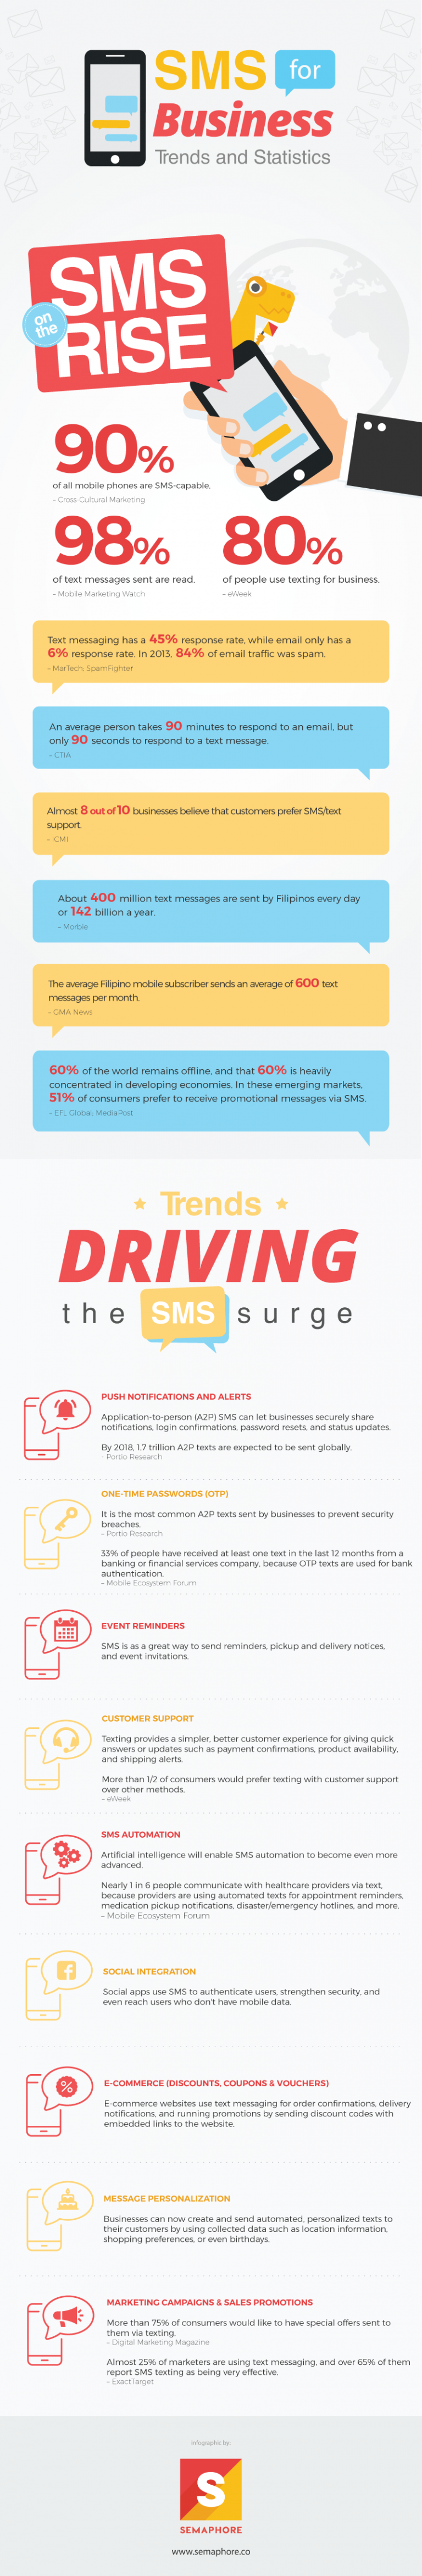 SMS for Business - Trends and Statistics [Infographic]